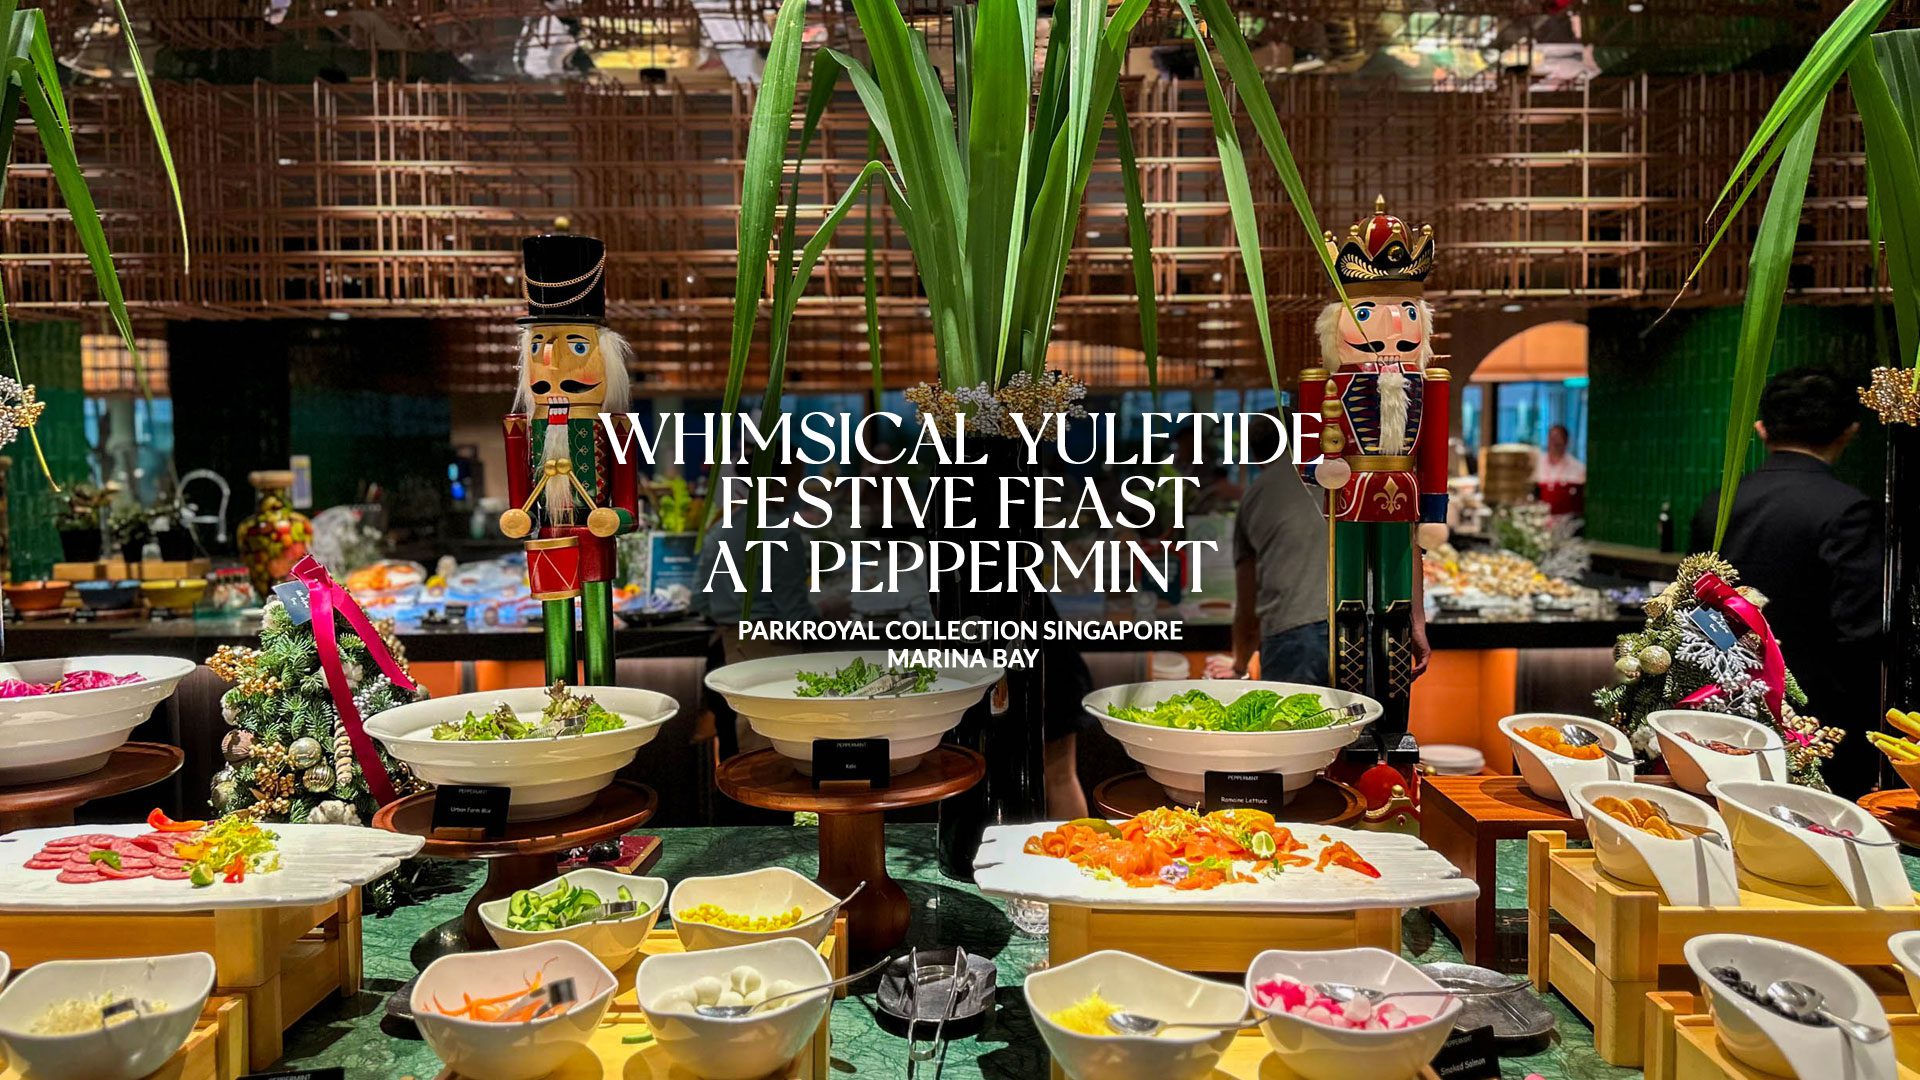 Whimsical Yuletide Festive Feast at Peppermint, PARKROYAL COLLECTION Marina Bay Singapore featured image